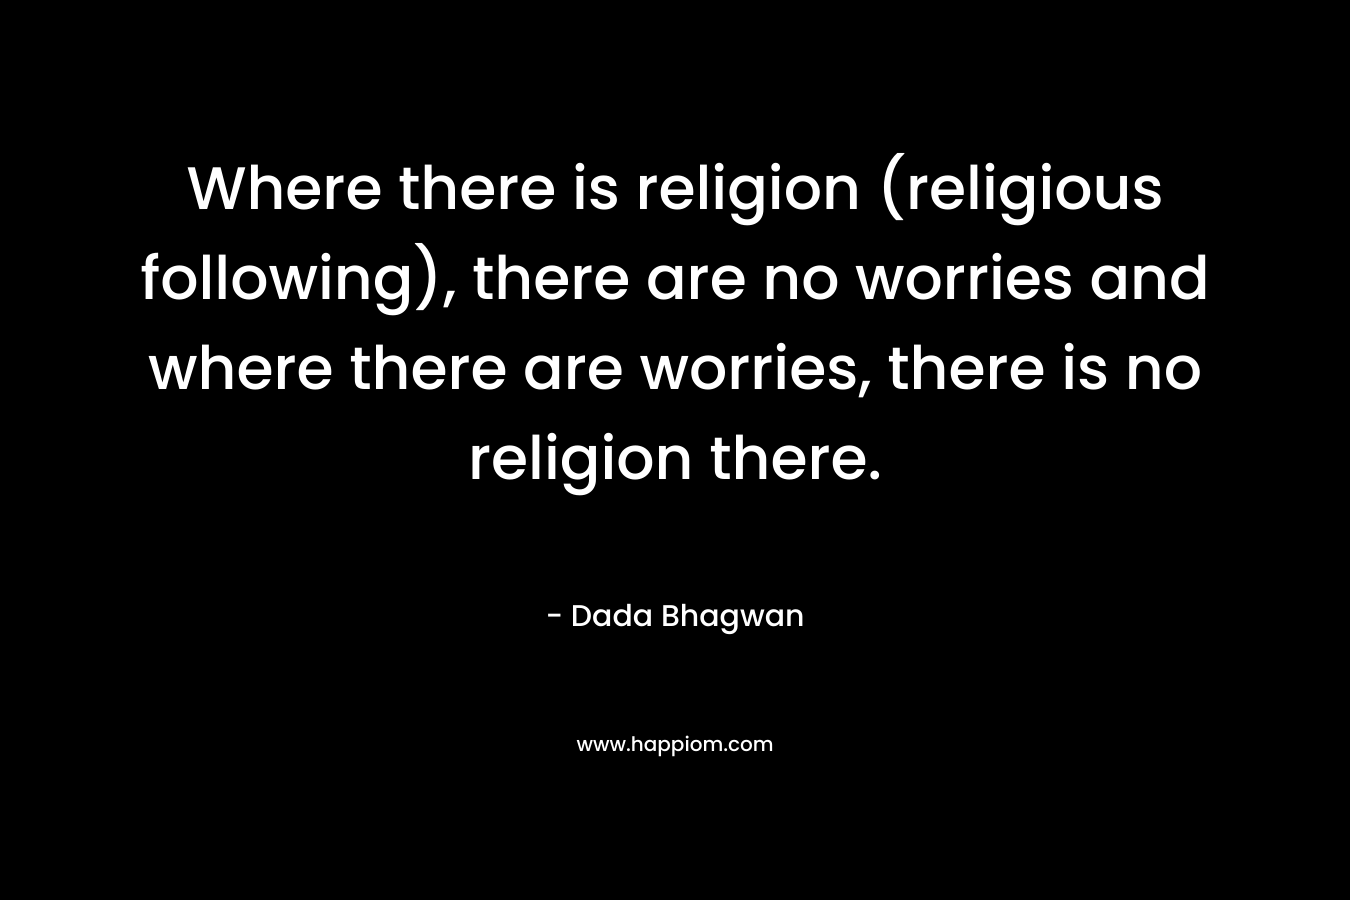 Where there is religion (religious following), there are no worries and where there are worries, there is no religion there.